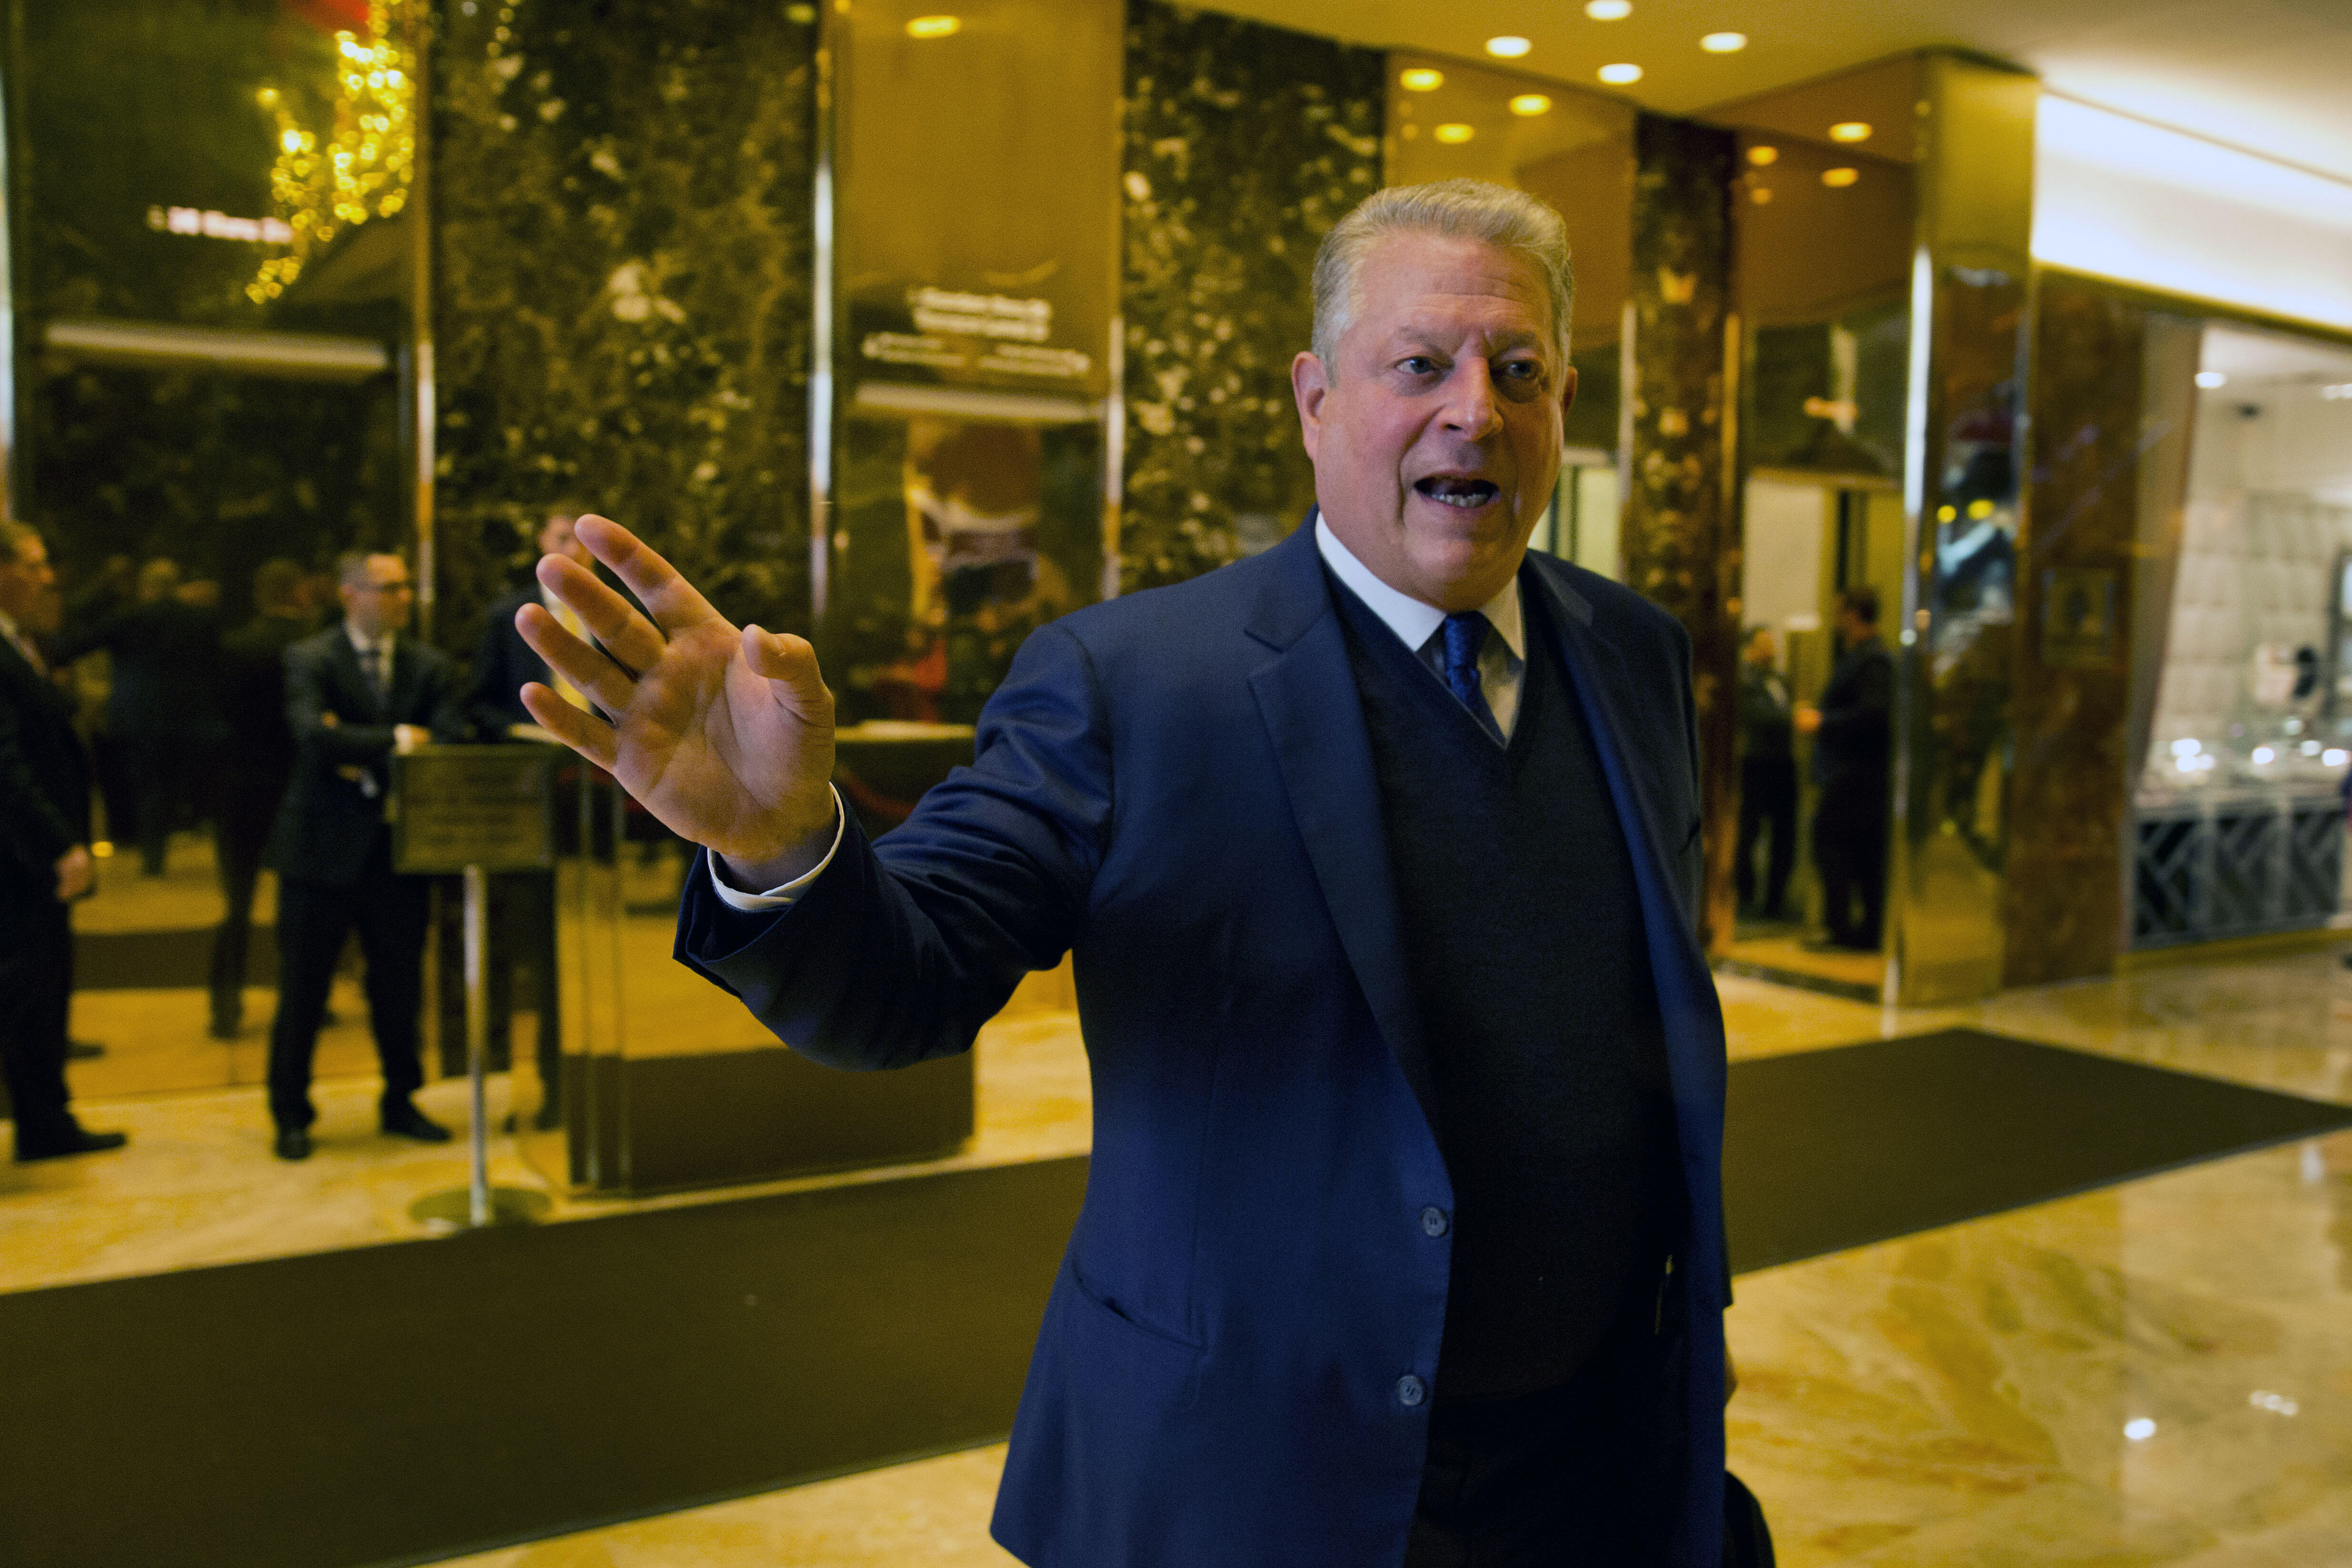 Former US Vice President Al Gore leaves after meetings at Trump Tower in New York City on December 5, 2016. / AFP / DOMINICK REUTER        (Photo credit should read DOMINICK REUTER/AFP/Getty Images)